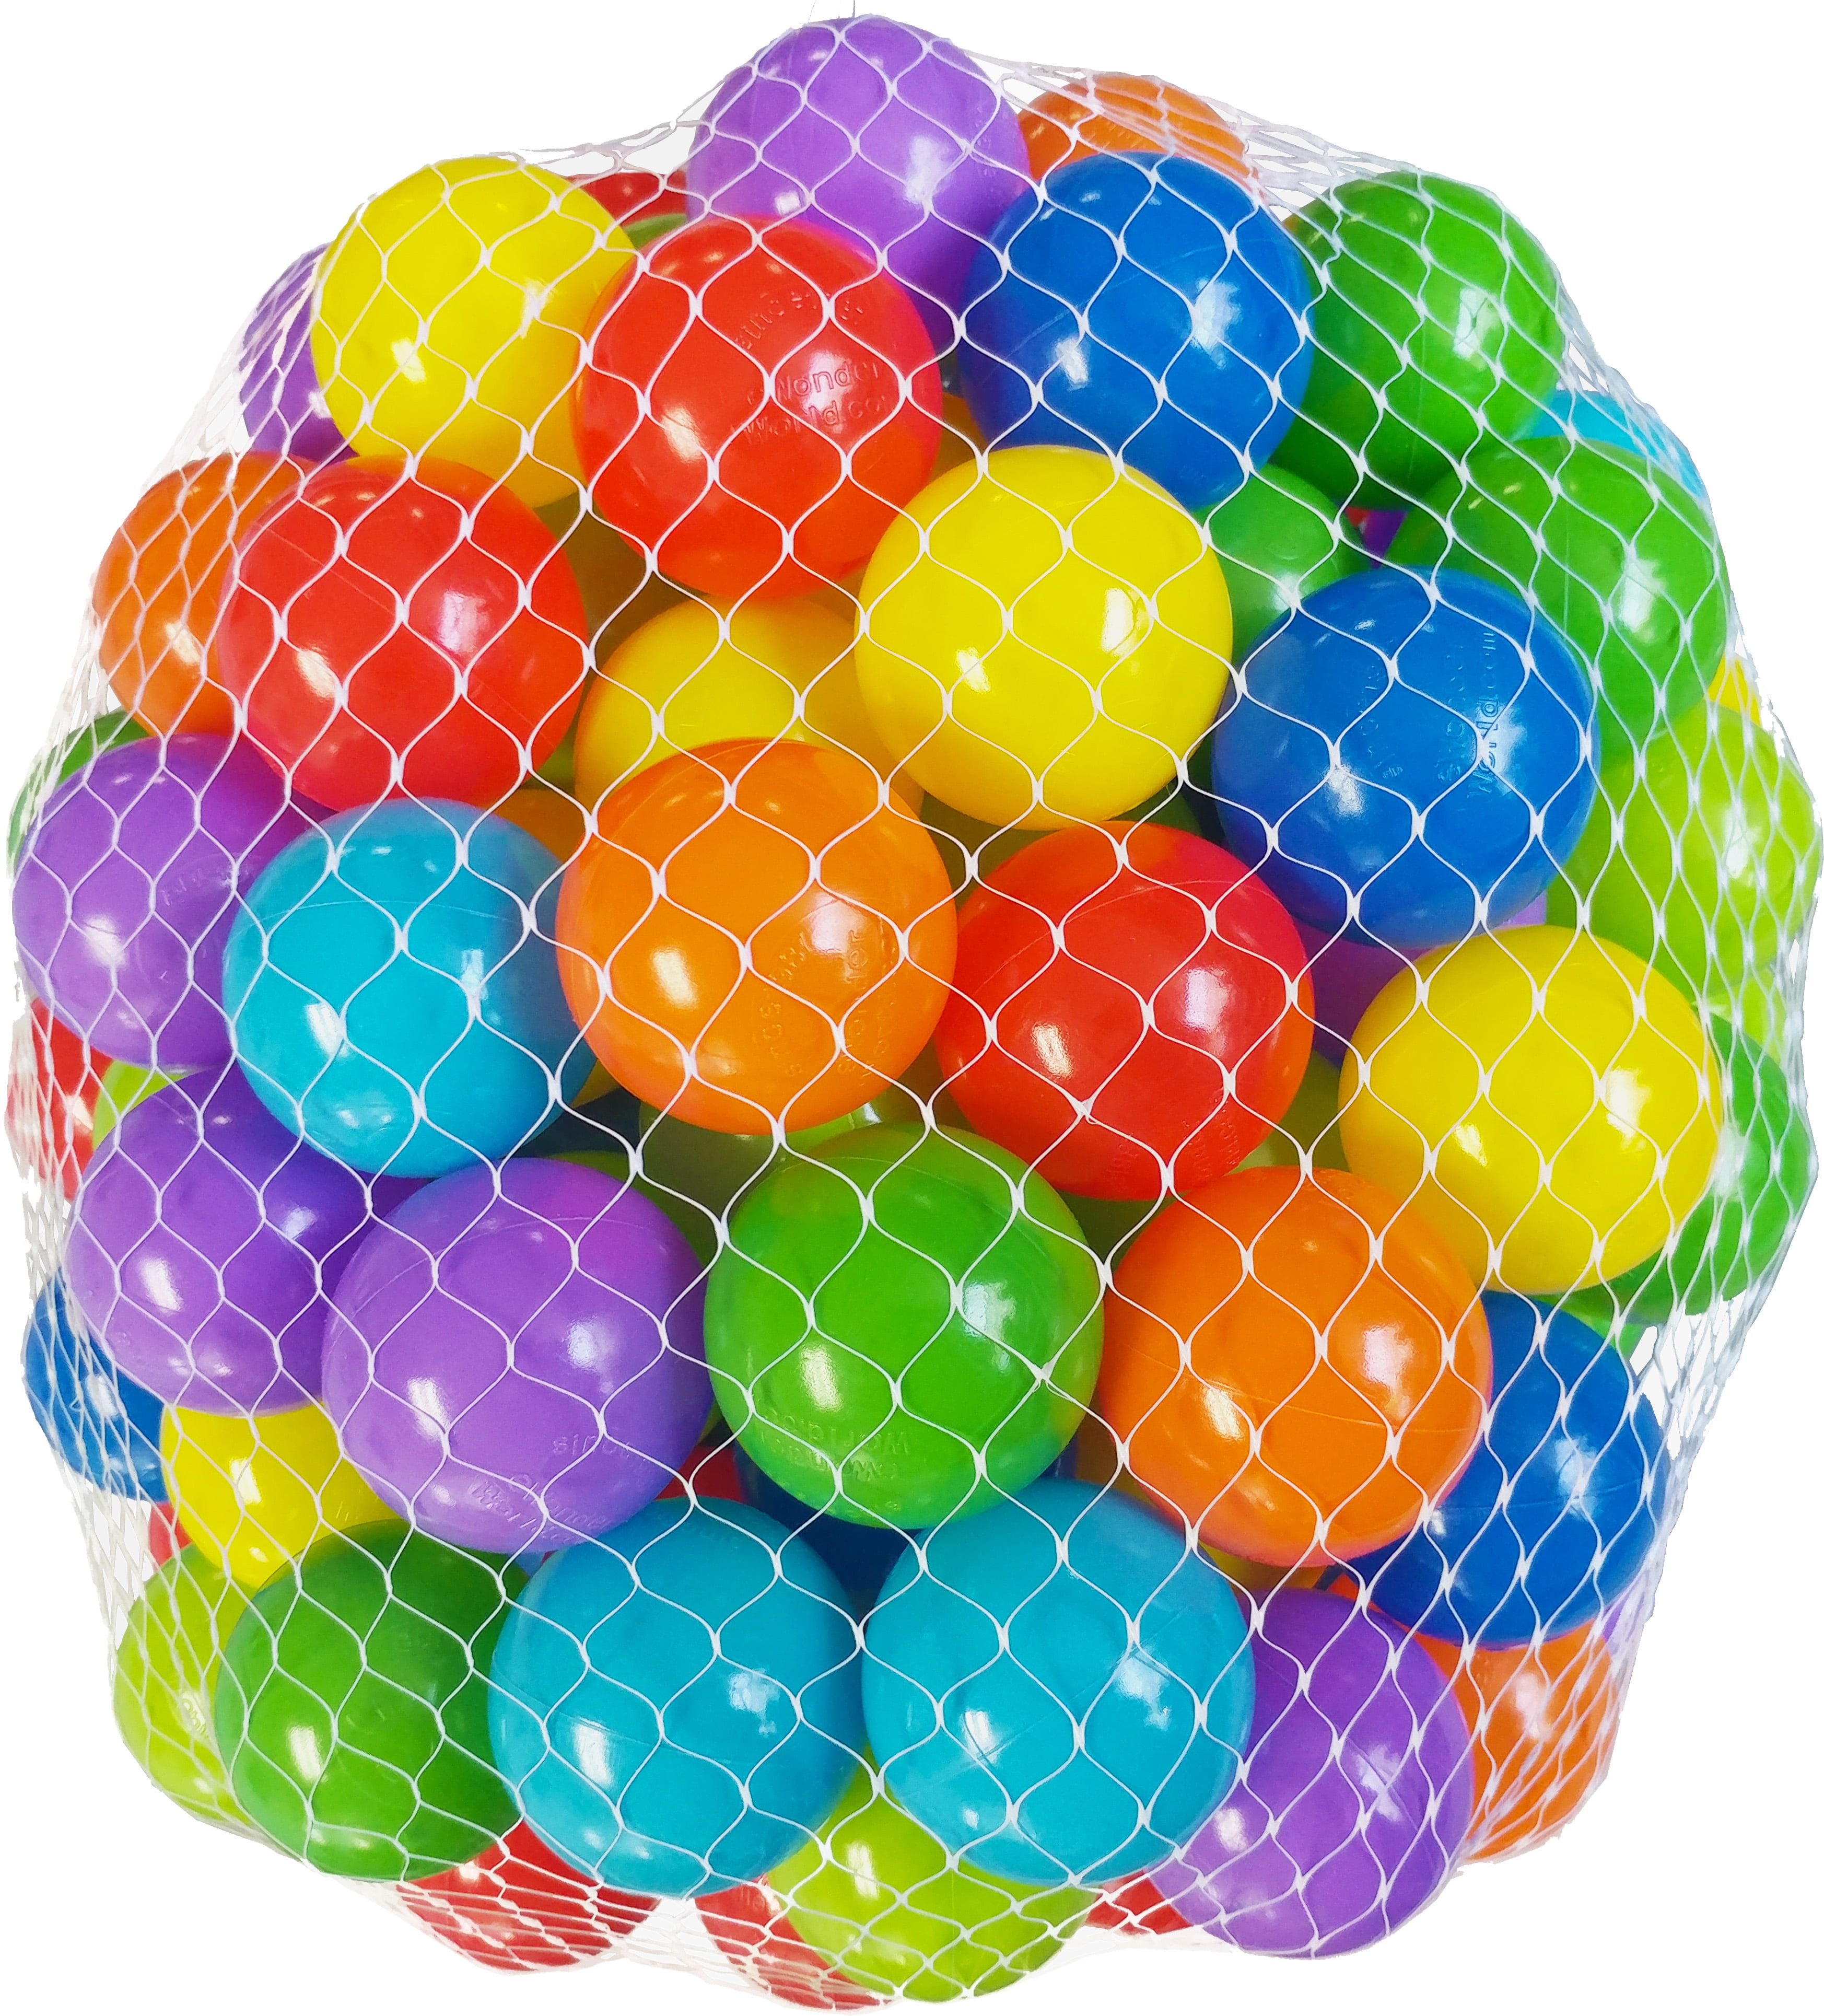 120 Count 7 Colors BPA Crush Proof Plastic Balls Pit for Toddlers Kids Toys for sale online